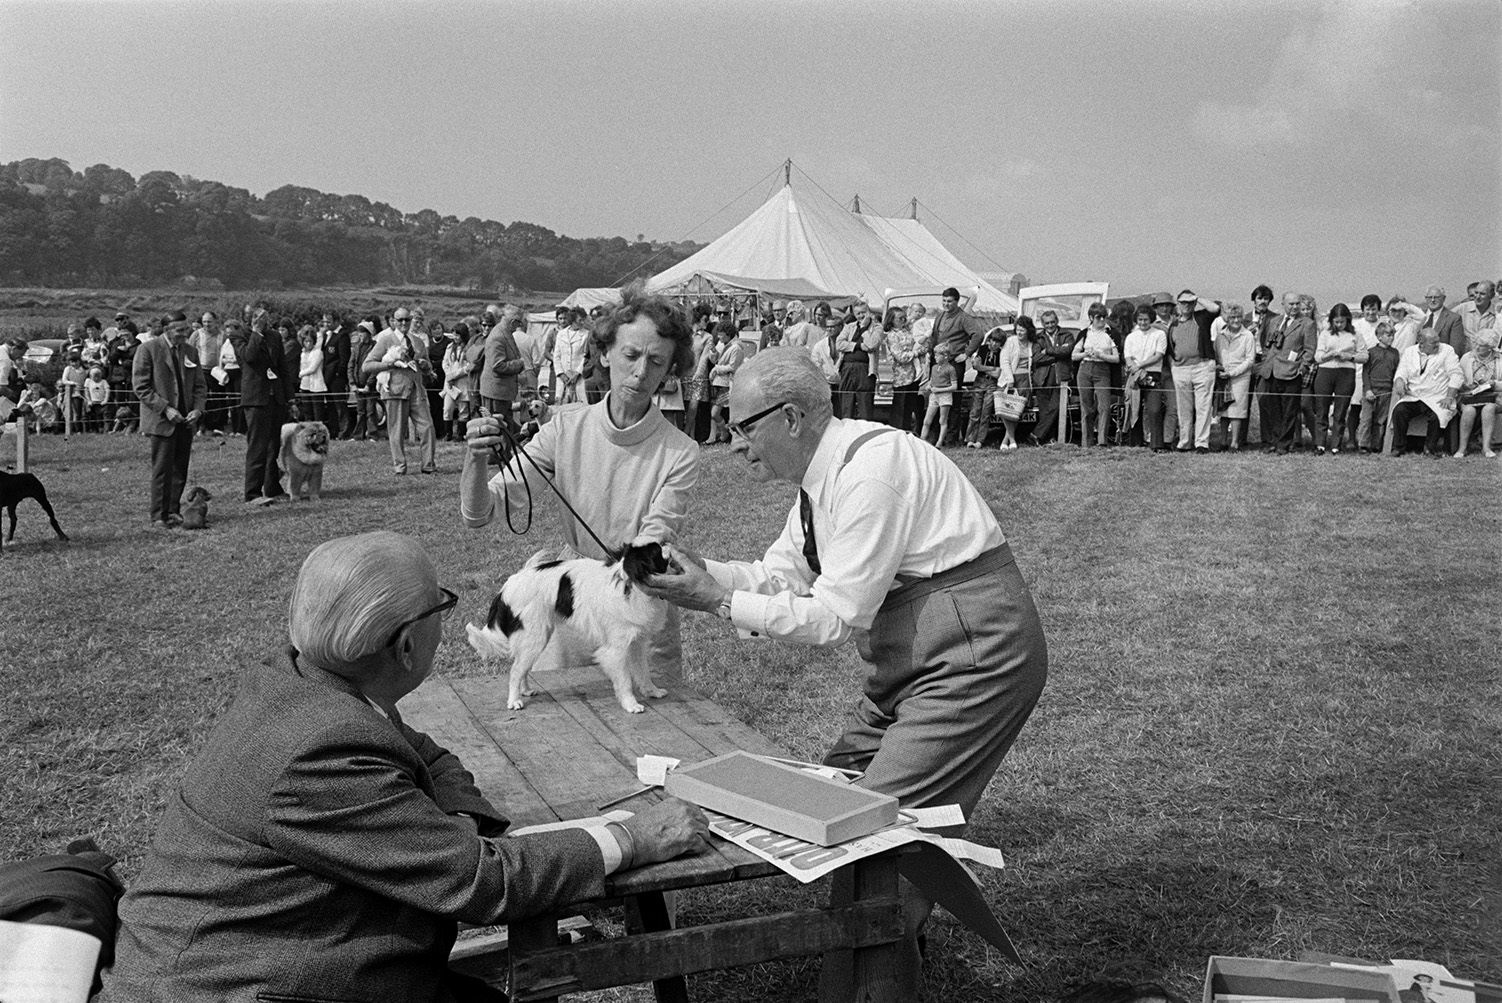 Two men judging a small dog at the North Devon Show at Instow. A woman is holding the dog's lead and a crowd of spectators is watching. A large marquee can be seen in the background.